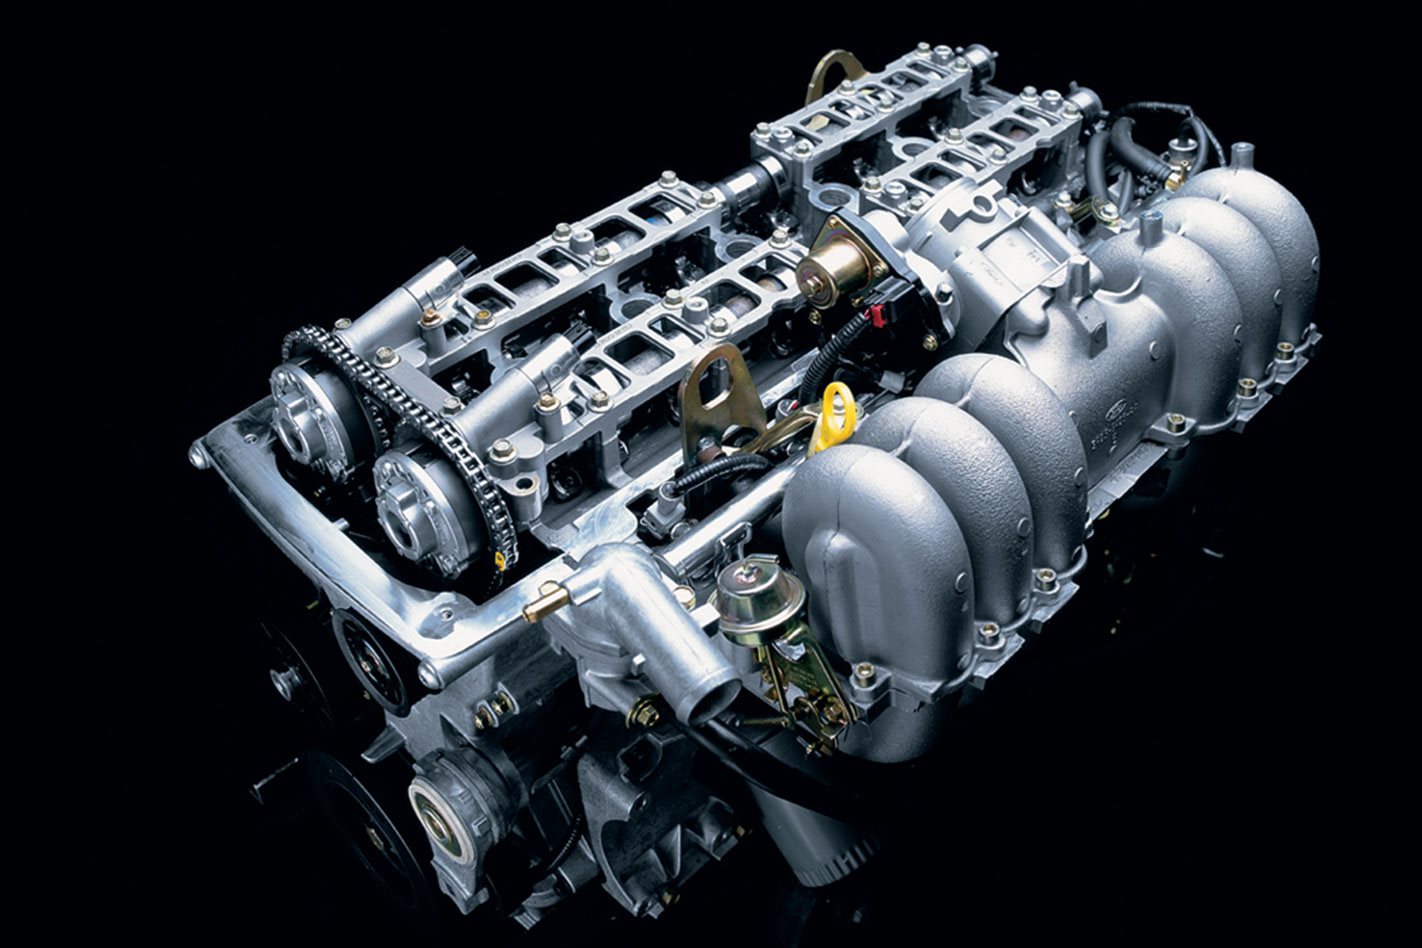 15 Years Of Ford S Barra Engine What To Look For When Buying A Barra